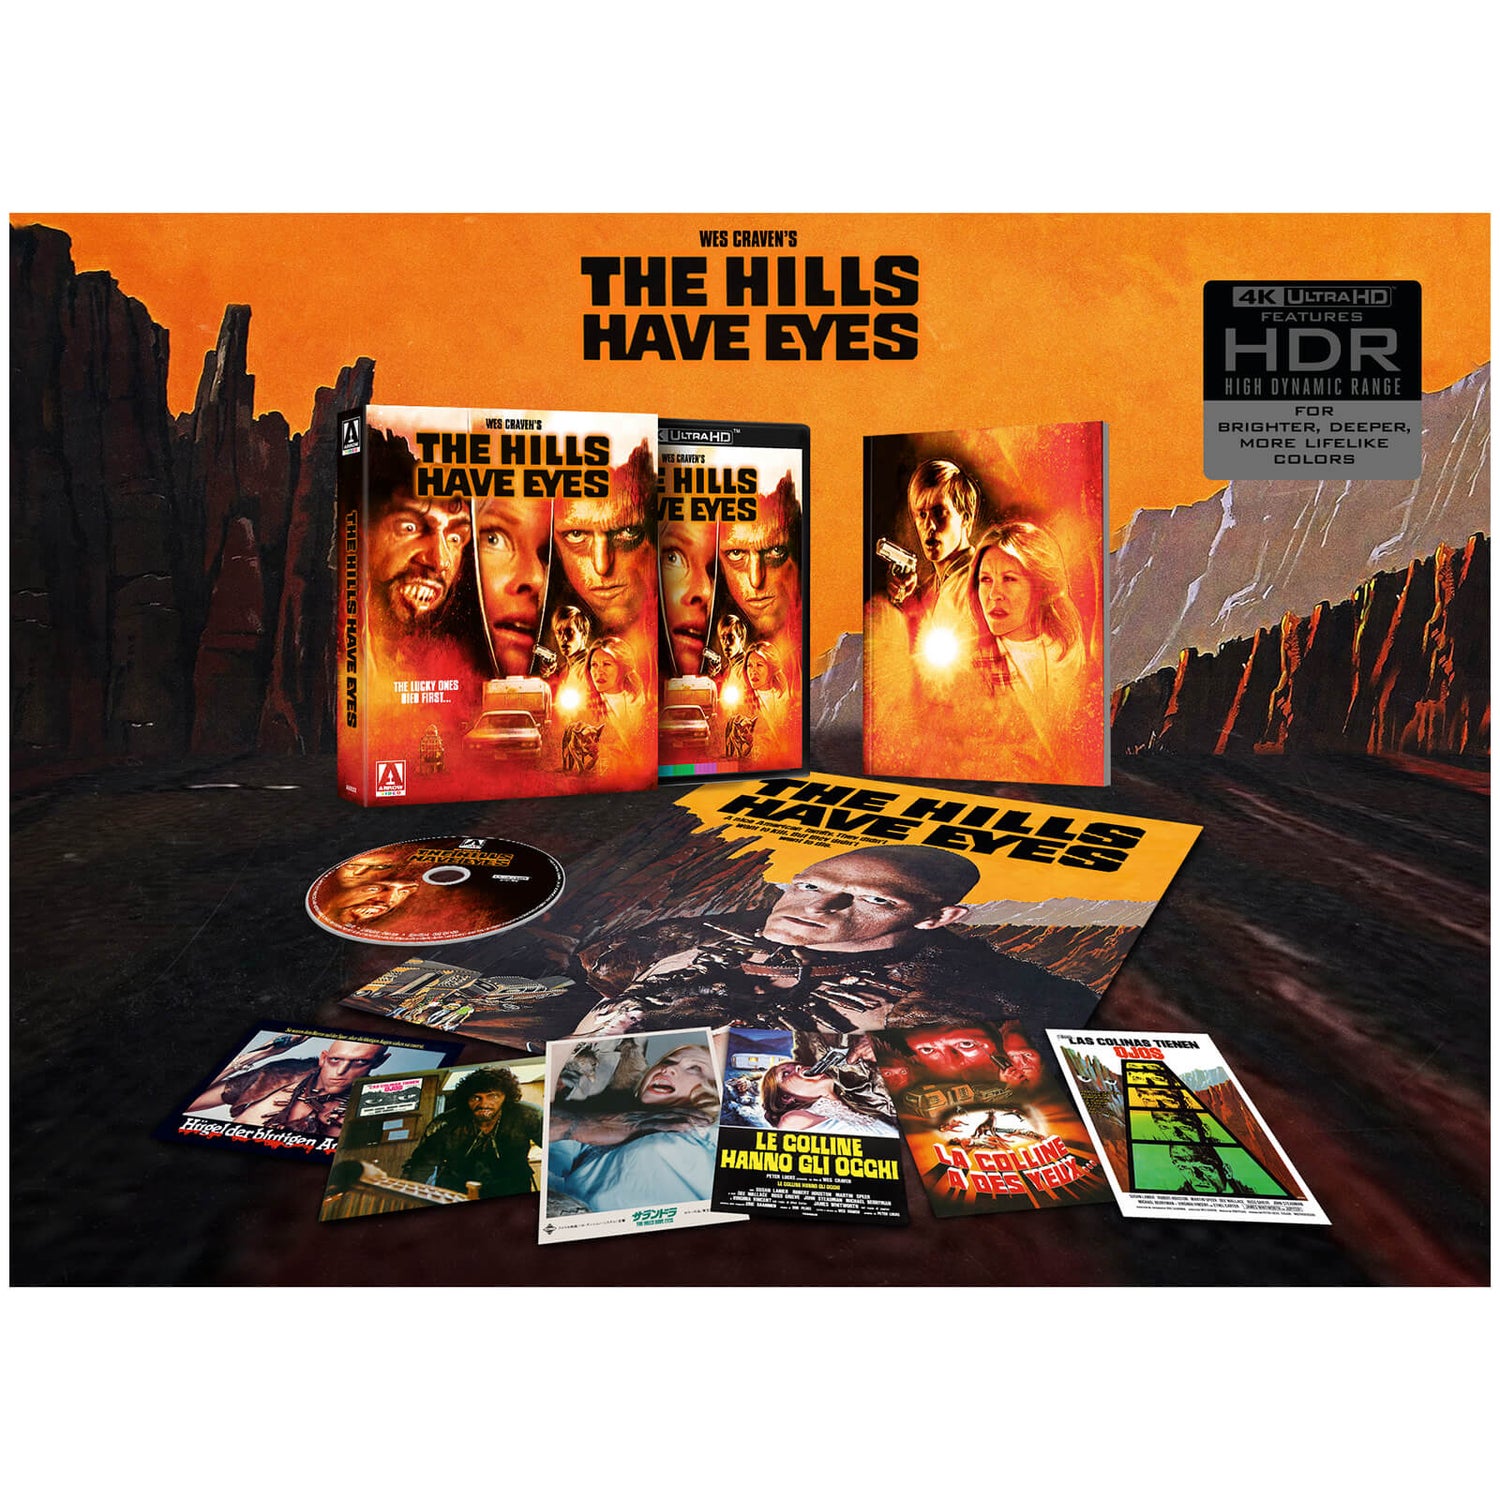 The Hills Have Eyes Limited Edition 4K UHD